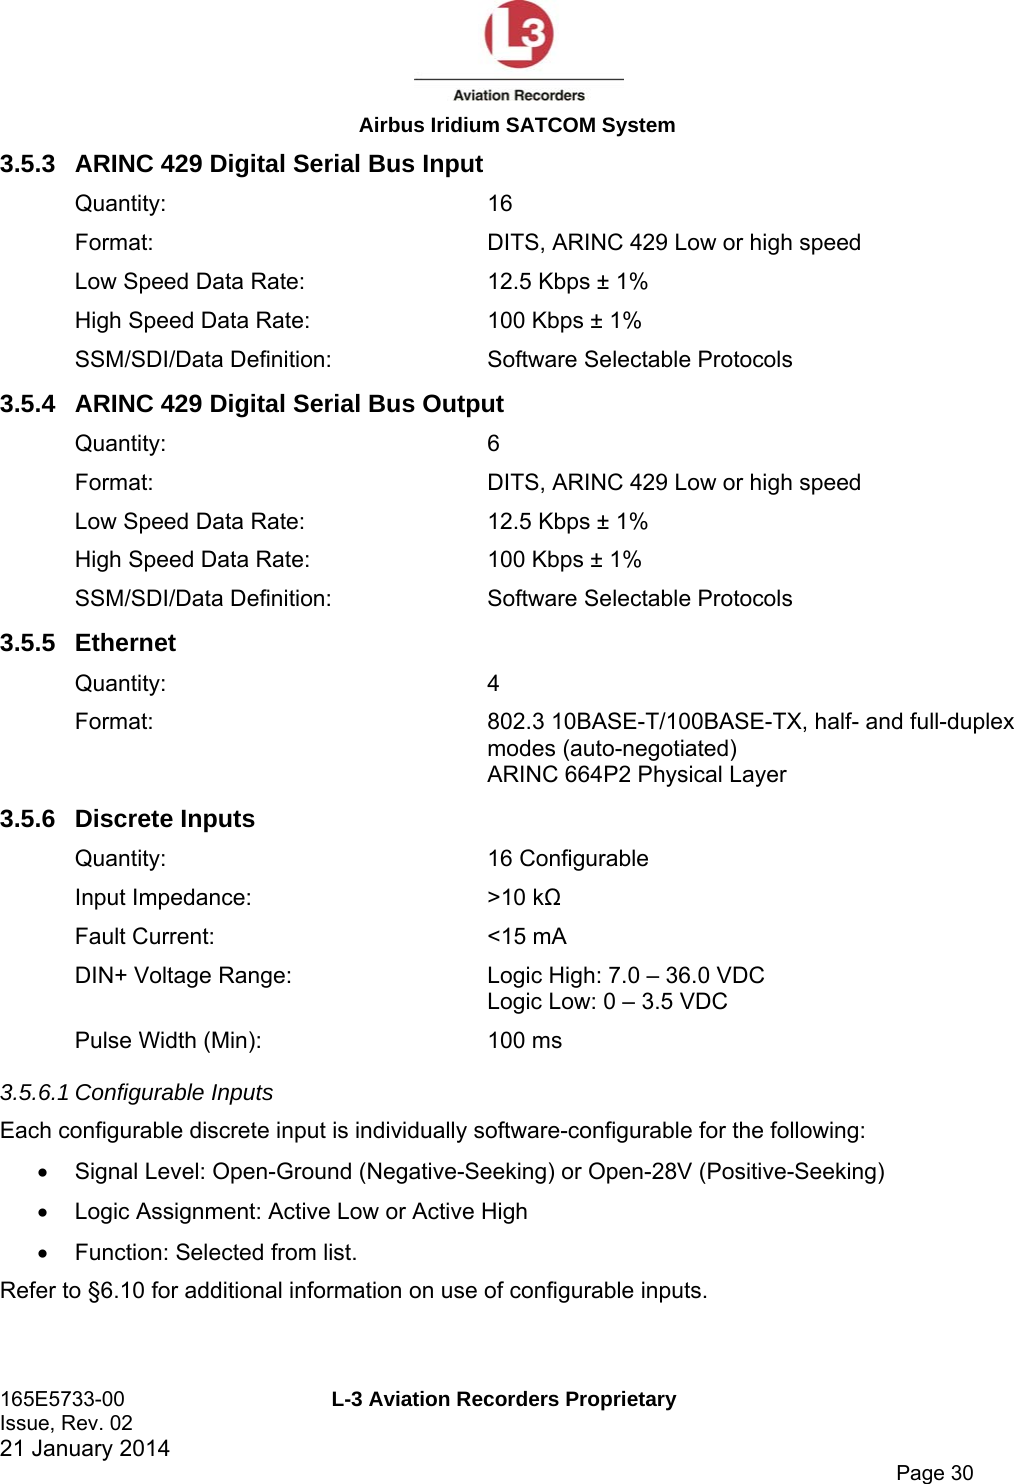  Airbus Iridium SATCOM System 165E5733-00  L-3 Aviation Recorders Proprietary Issue, Rev. 02   21 January 2014      Page 30 3.5.3  ARINC 429 Digital Serial Bus Input Quantity: 16 Format:  DITS, ARINC 429 Low or high speed Low Speed Data Rate:  12.5 Kbps ± 1% High Speed Data Rate:  100 Kbps ± 1% SSM/SDI/Data Definition:  Software Selectable Protocols 3.5.4  ARINC 429 Digital Serial Bus Output Quantity: 6 Format:  DITS, ARINC 429 Low or high speed Low Speed Data Rate:  12.5 Kbps ± 1% High Speed Data Rate:  100 Kbps ± 1% SSM/SDI/Data Definition:  Software Selectable Protocols 3.5.5 Ethernet Quantity: 4 Format:  802.3 10BASE-T/100BASE-TX, half- and full-duplex modes (auto-negotiated) ARINC 664P2 Physical Layer 3.5.6 Discrete Inputs Quantity: 16 Configurable Input Impedance:  &gt;10 kΩ Fault Current:  &lt;15 mA DIN+ Voltage Range:  Logic High: 7.0 – 36.0 VDC Logic Low: 0 – 3.5 VDC Pulse Width (Min):  100 ms 3.5.6.1 Configurable Inputs Each configurable discrete input is individually software-configurable for the following:   Signal Level: Open-Ground (Negative-Seeking) or Open-28V (Positive-Seeking)   Logic Assignment: Active Low or Active High   Function: Selected from list. Refer to §6.10 for additional information on use of configurable inputs. 